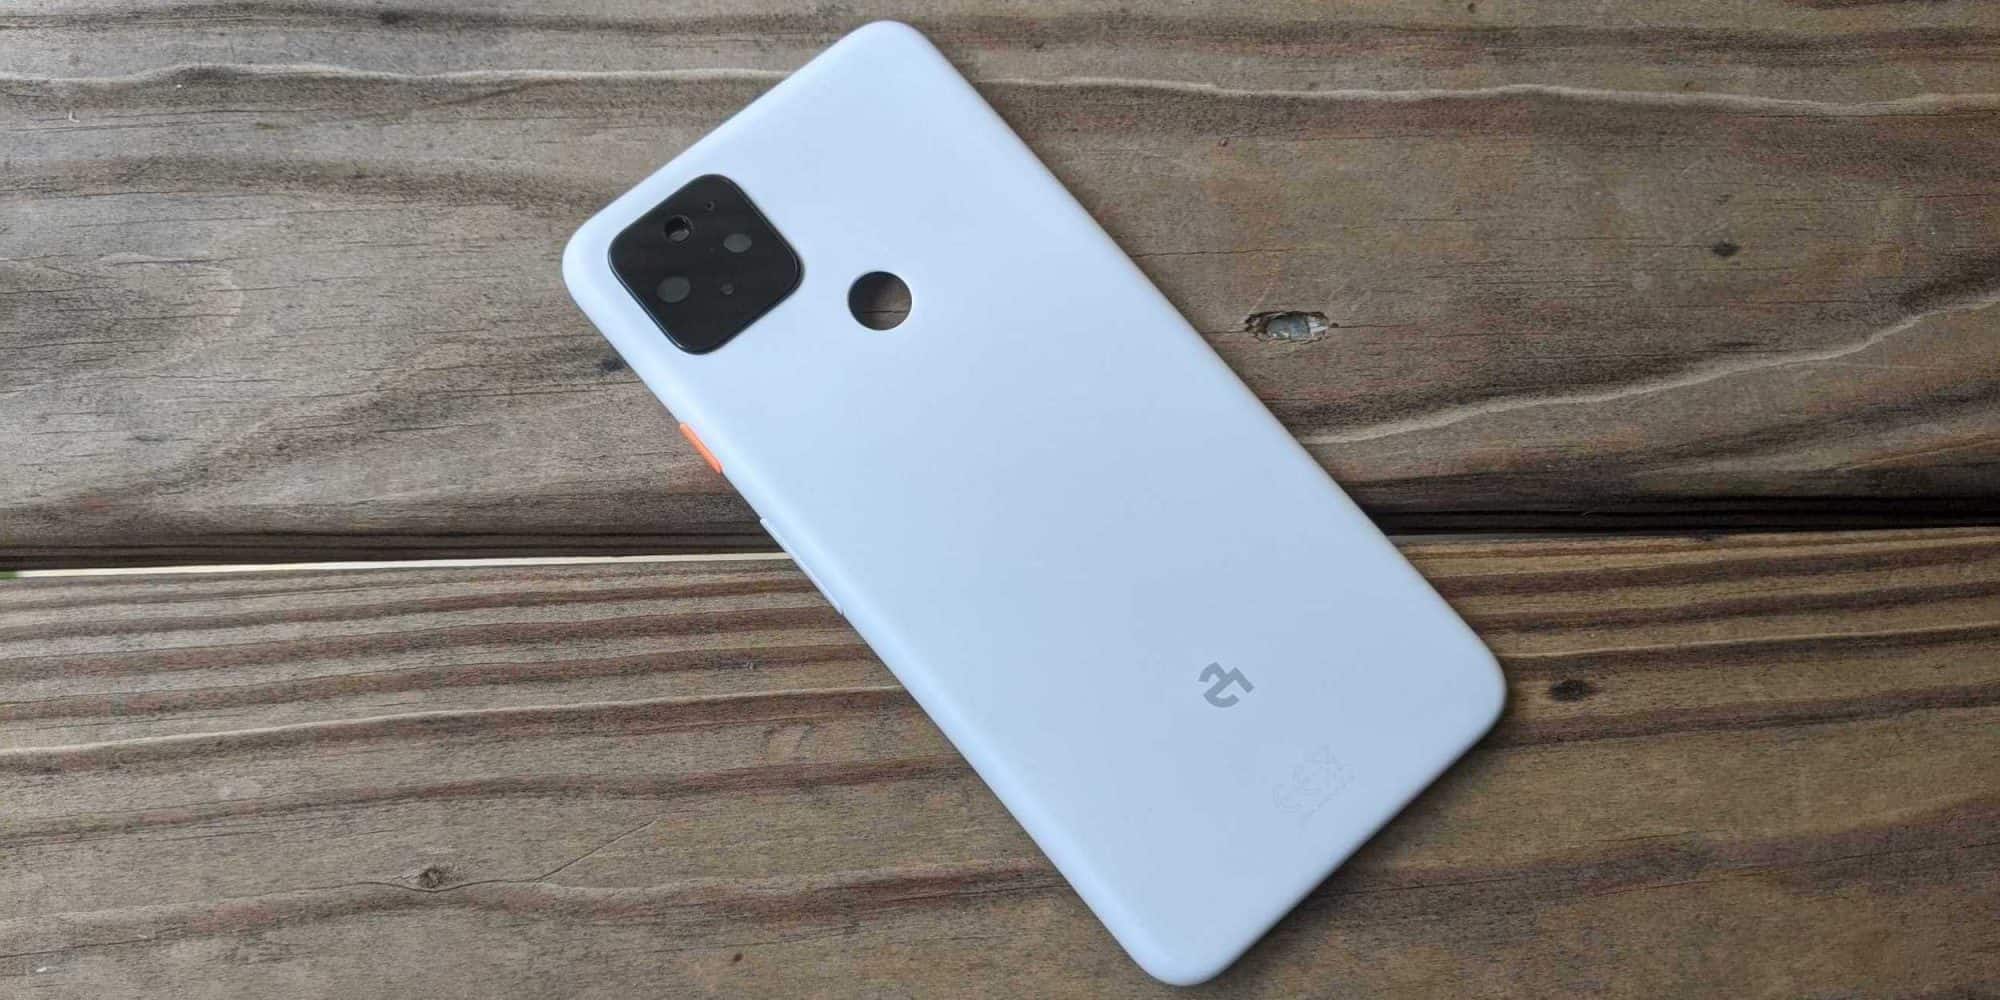 Early google pixel 4a performance review compares the 2020 mid-range pixel to the pixel 4, pixel 3a, and pixel 3 xl